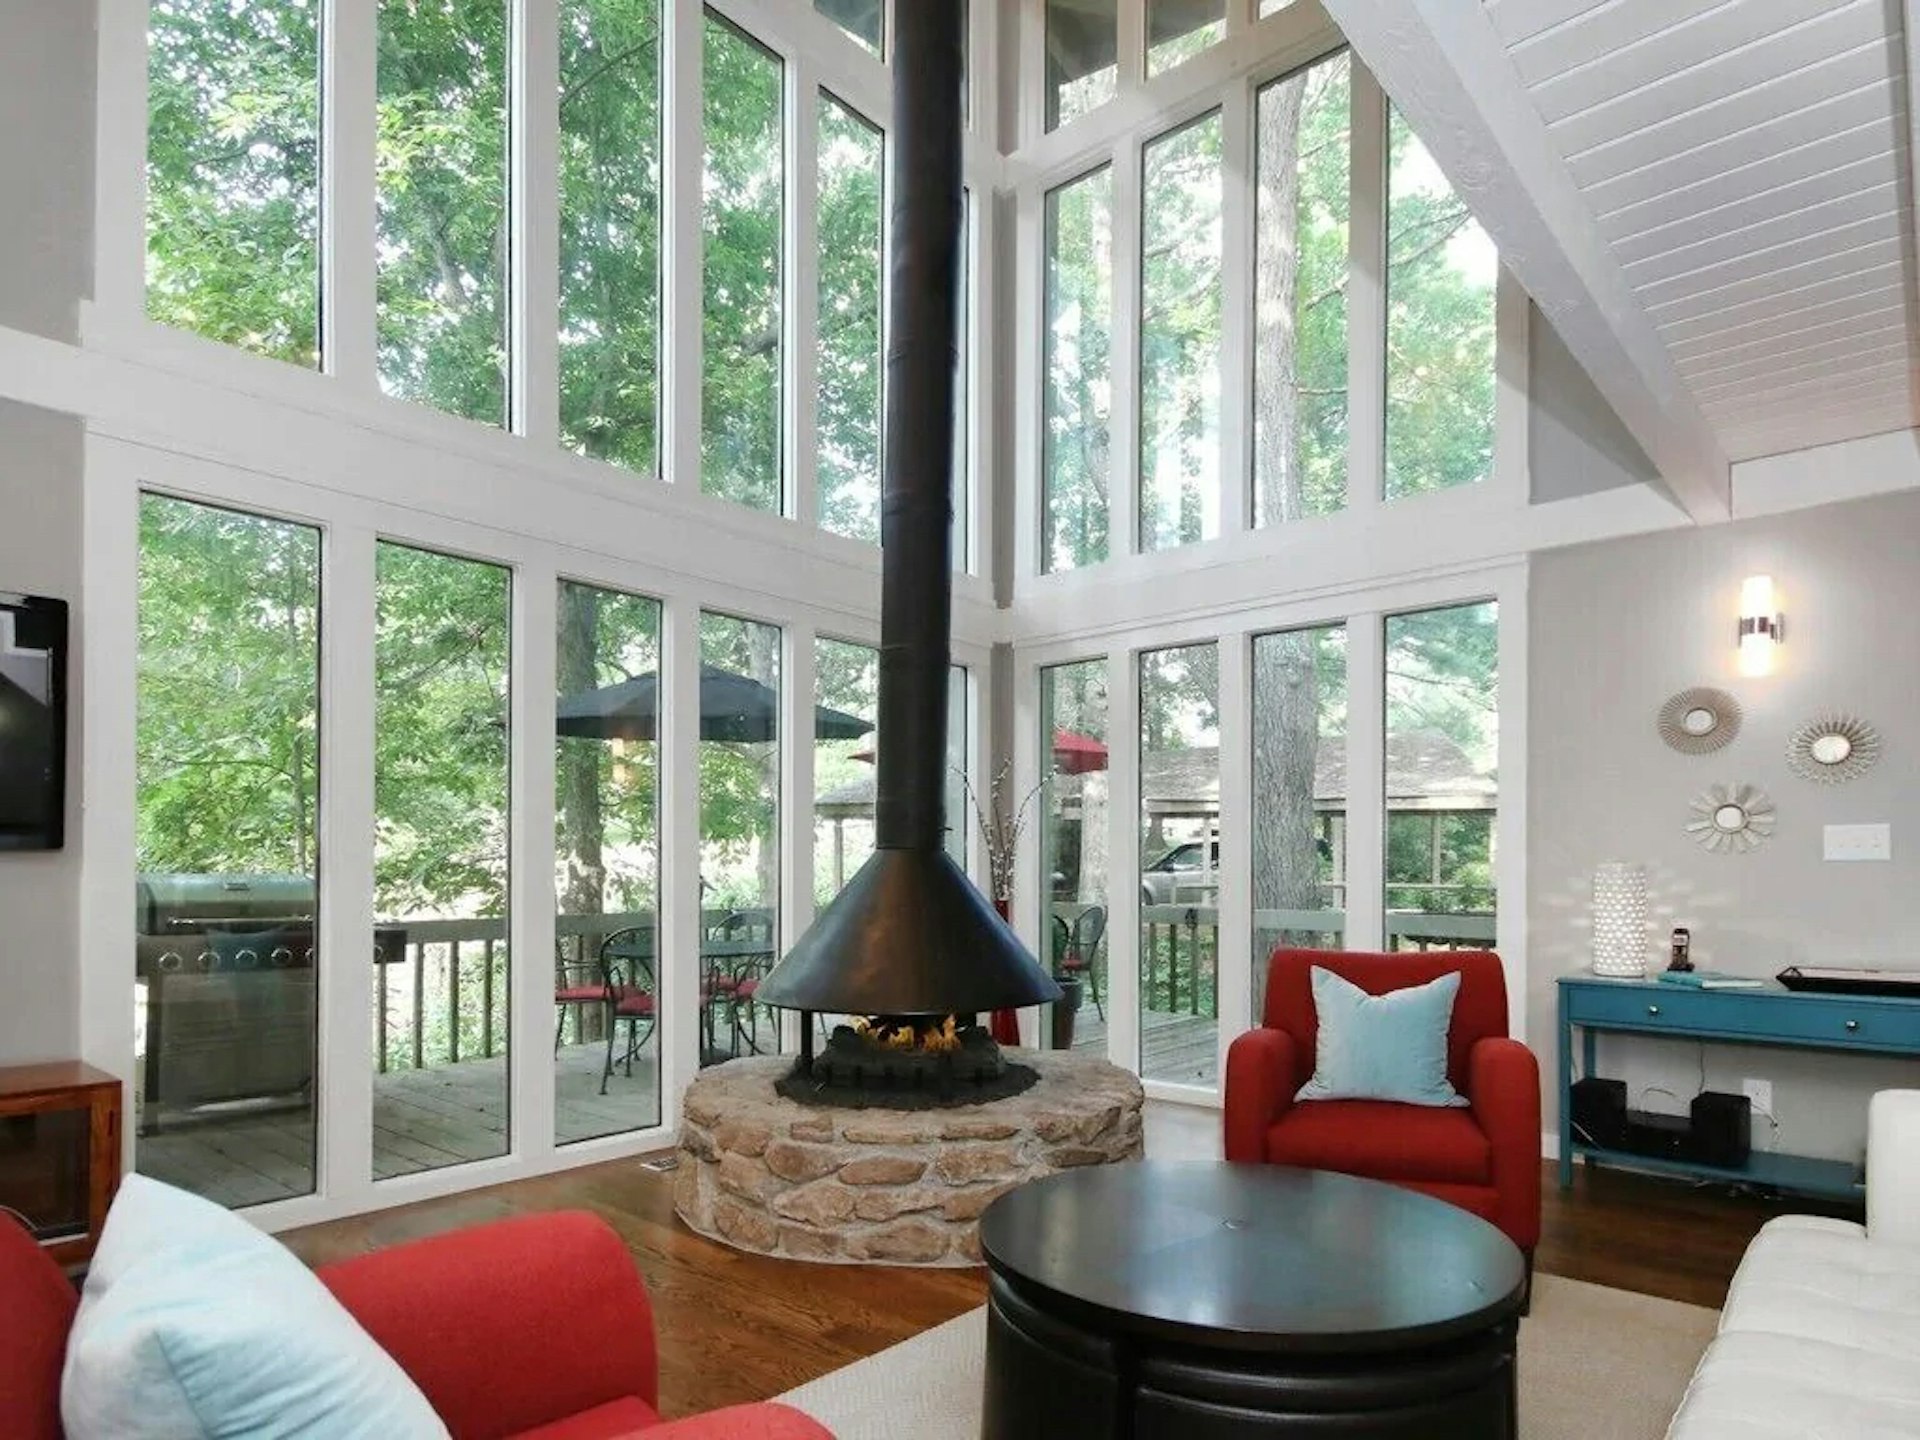 Interior view of the living room and balcony at Tree Tops tree house in Asheville, North Carolina